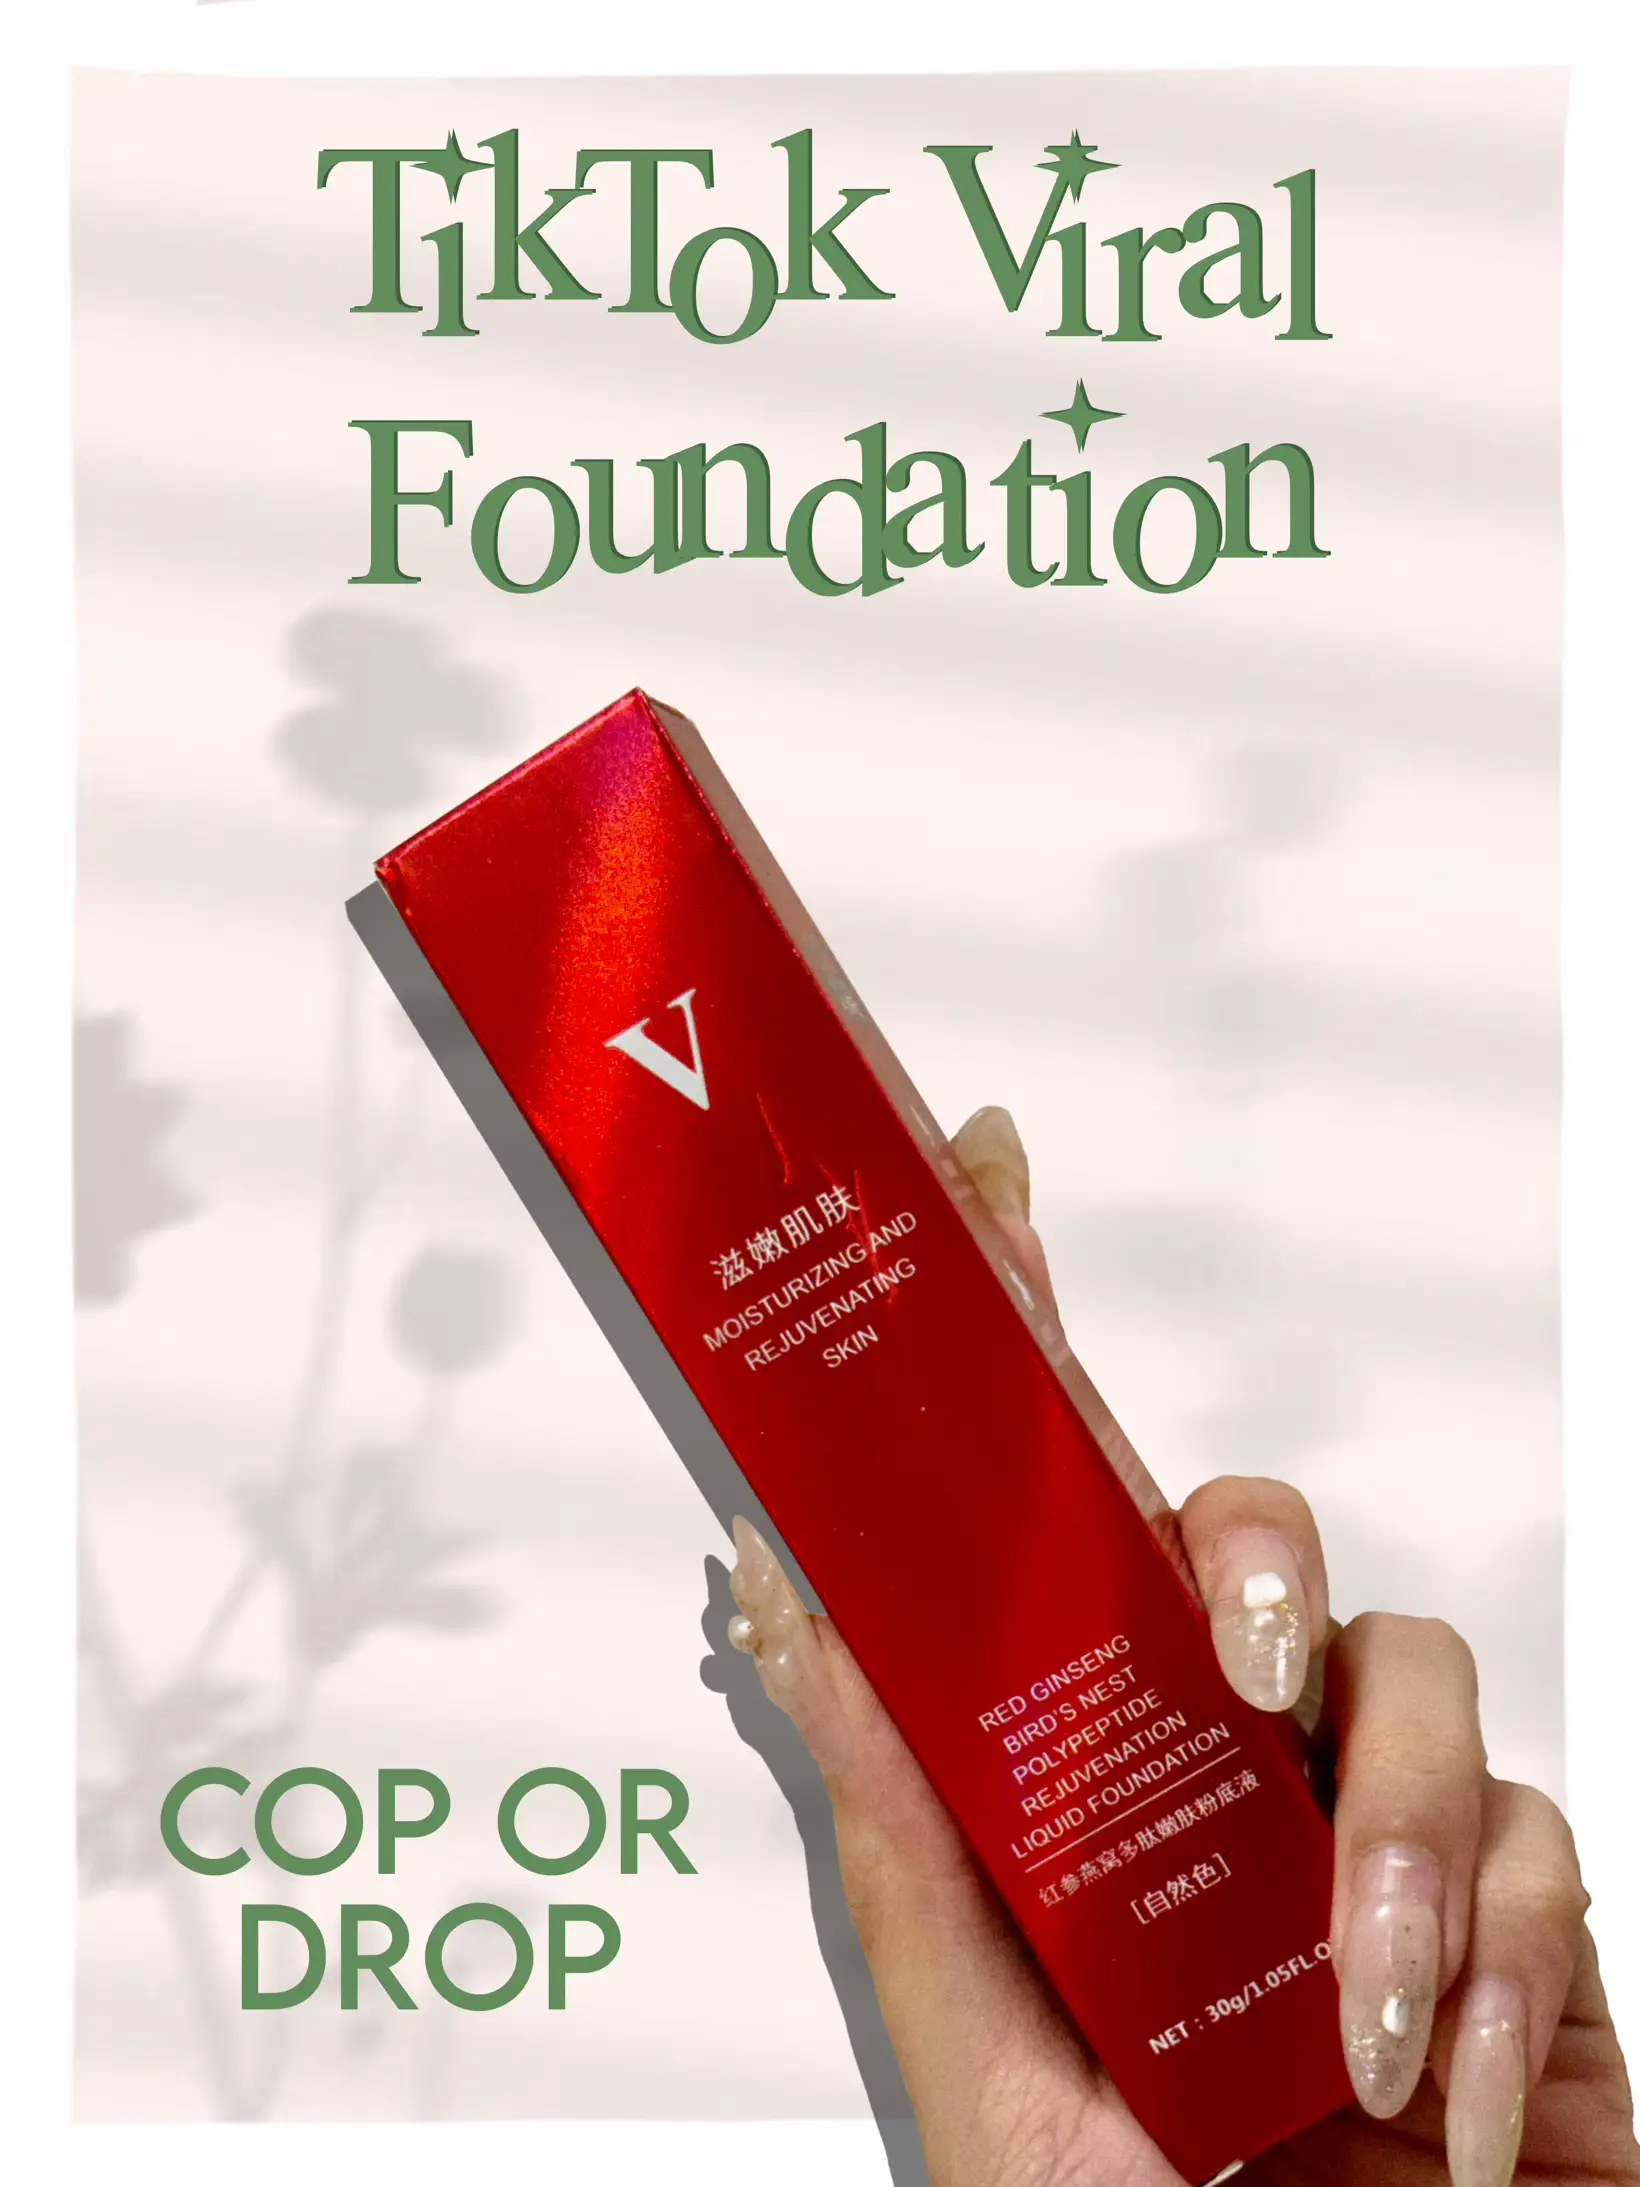 NEW FV Foundation Red Ginseng Bird's Nest Liquid Foundation Oil-control  Waterproof Hydrating Concealer Long-lasting Face Base 15